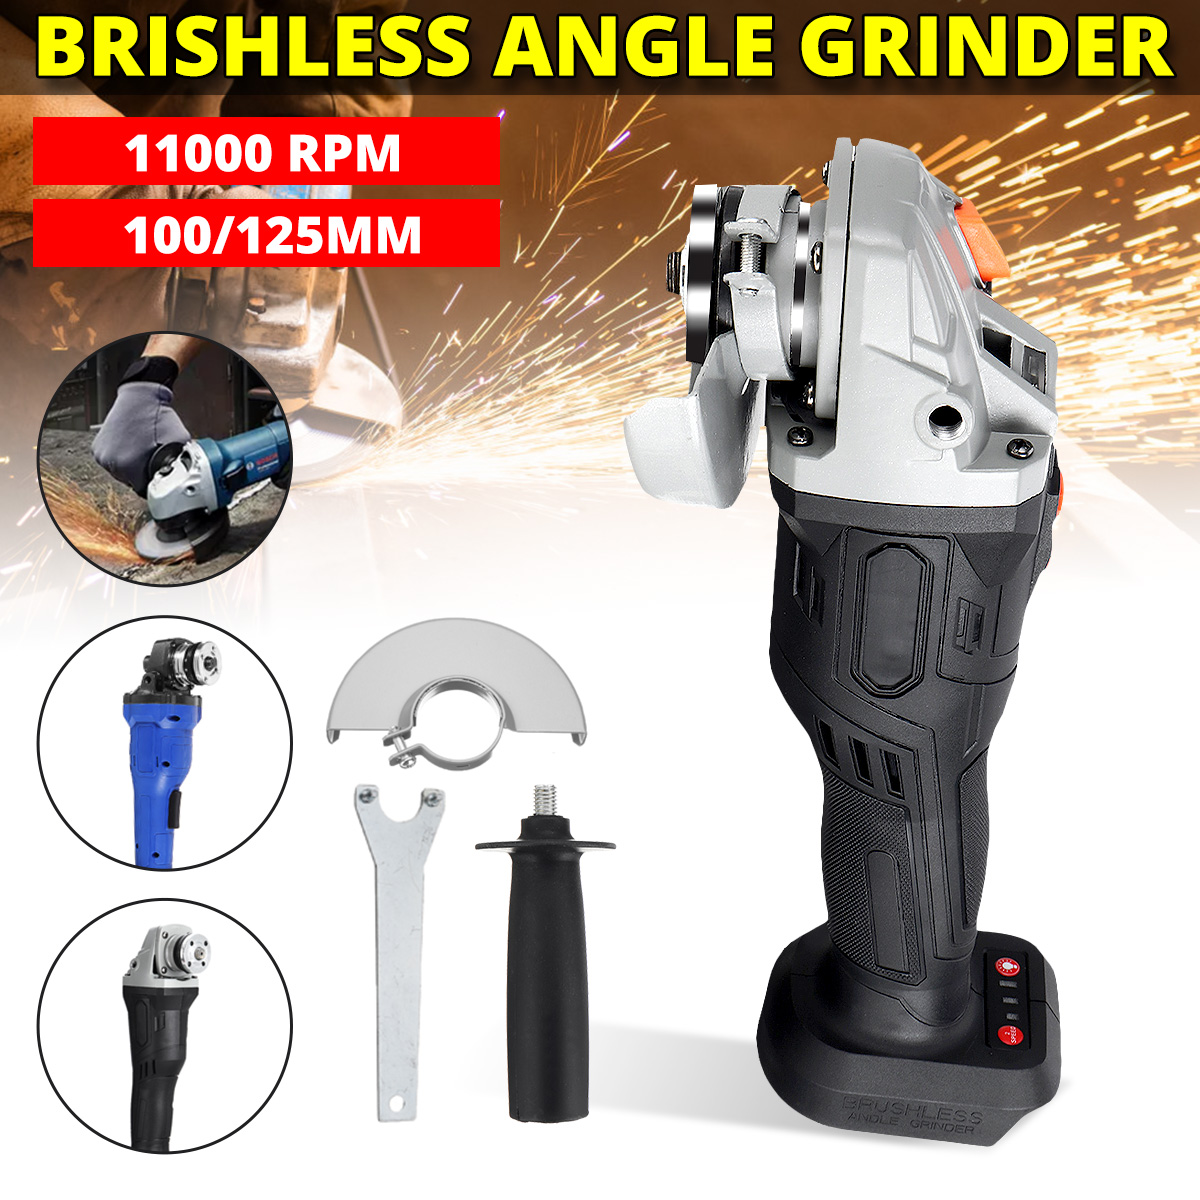 100125MM-Display-800W-Electric-Angle-Grinder-Rech-argeable-Polishing-Cutting-Machine-Hand-Grinder-To-1683204-2